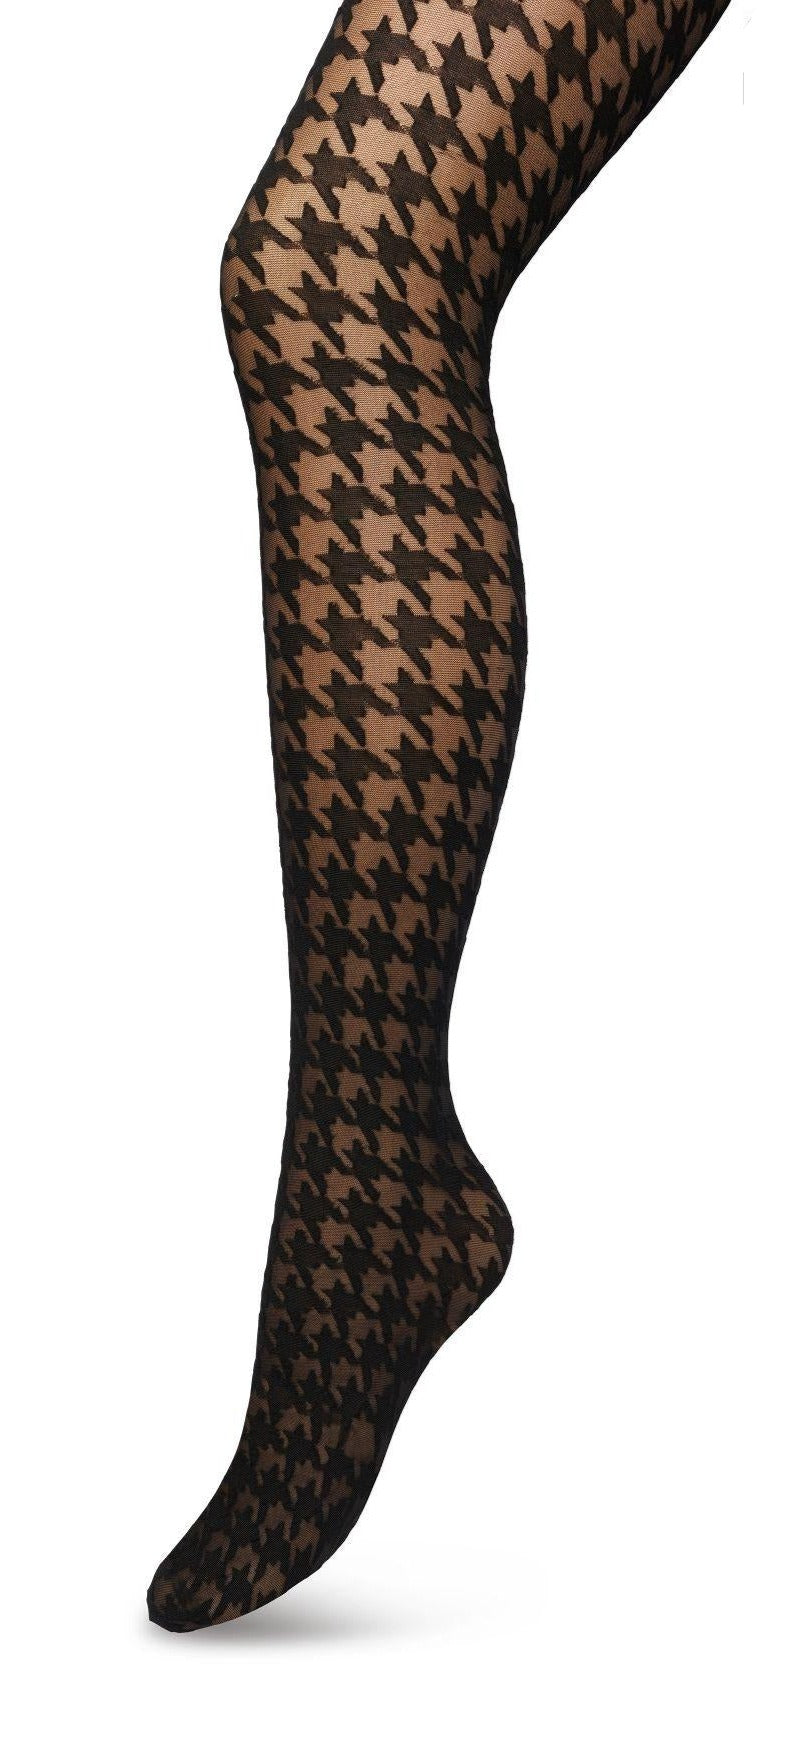 Bonnie Doon BP221903 Houndstooth Tights - Sheer fashion tights with a woven opaque dogtooth pattern in black